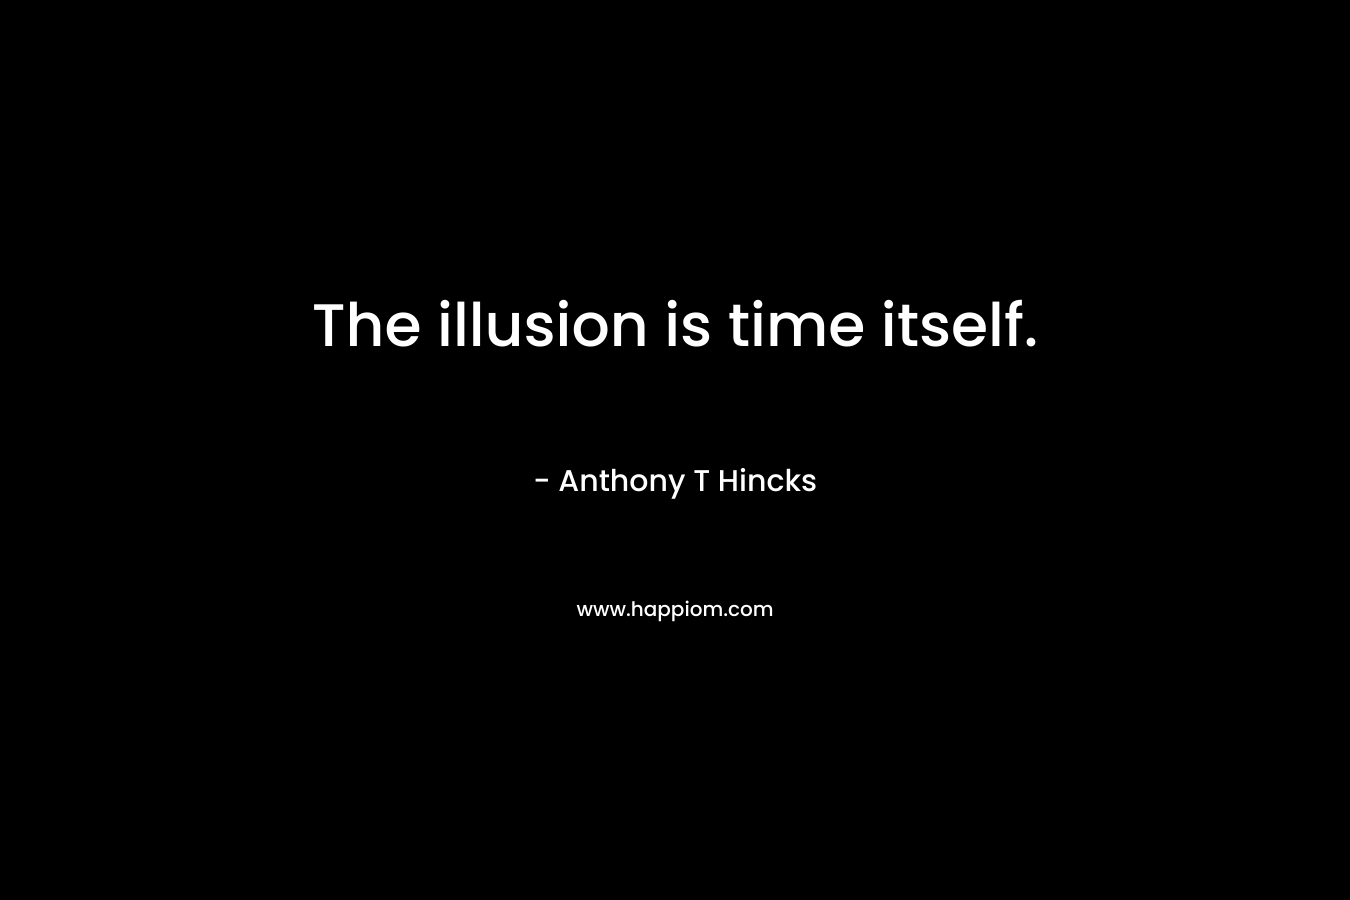 The illusion is time itself.